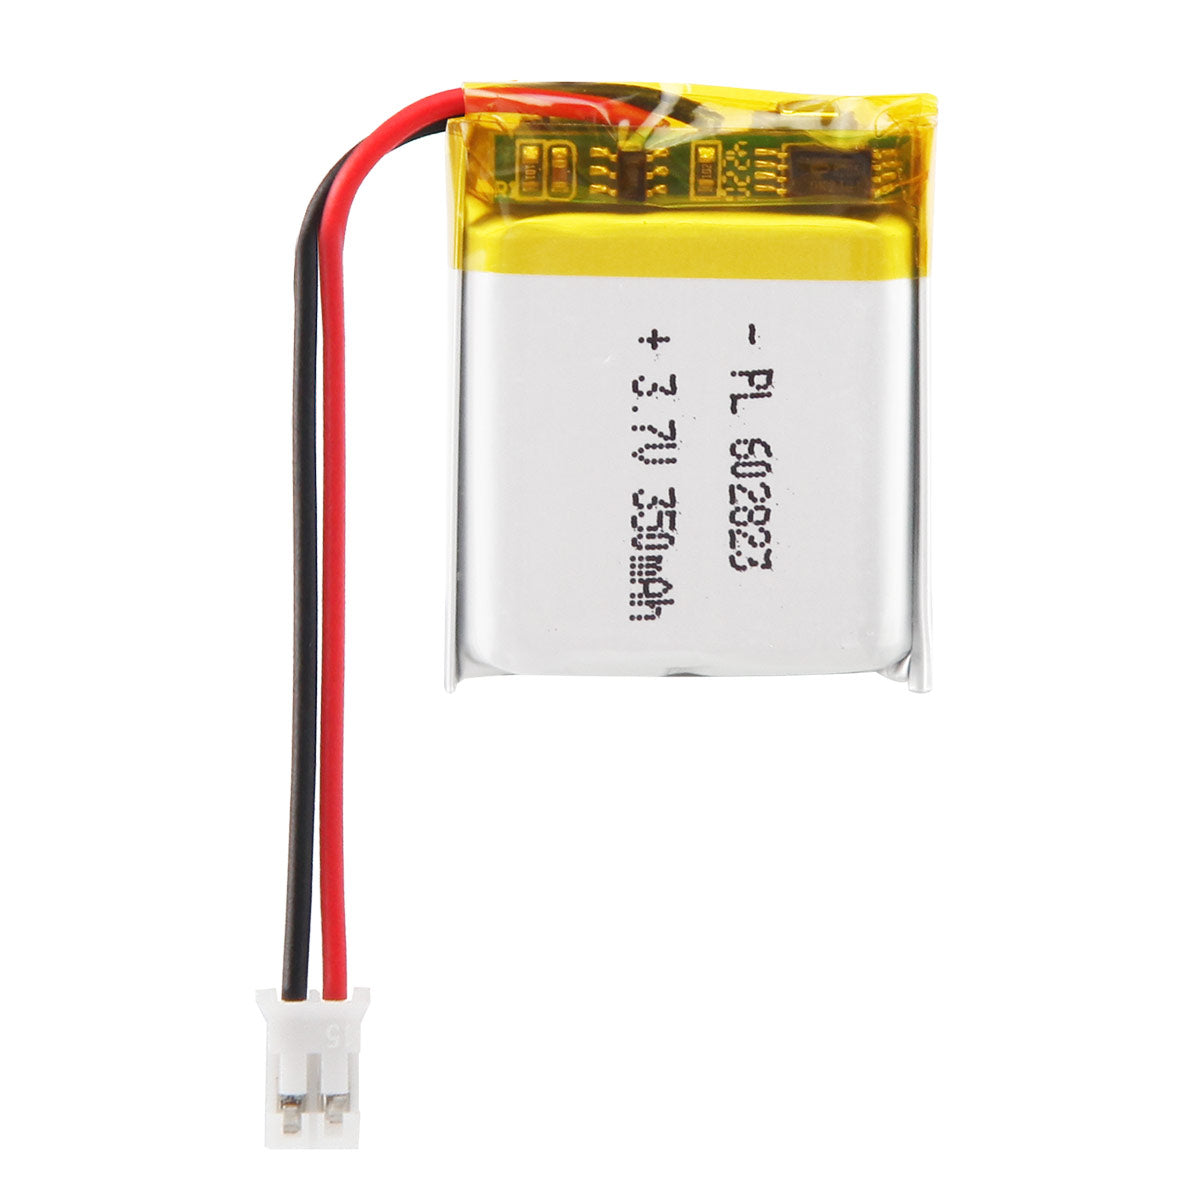 YDL 3.7V 350mAh 602823 Rechargeable Lithium Polymer Battery Length 25mm